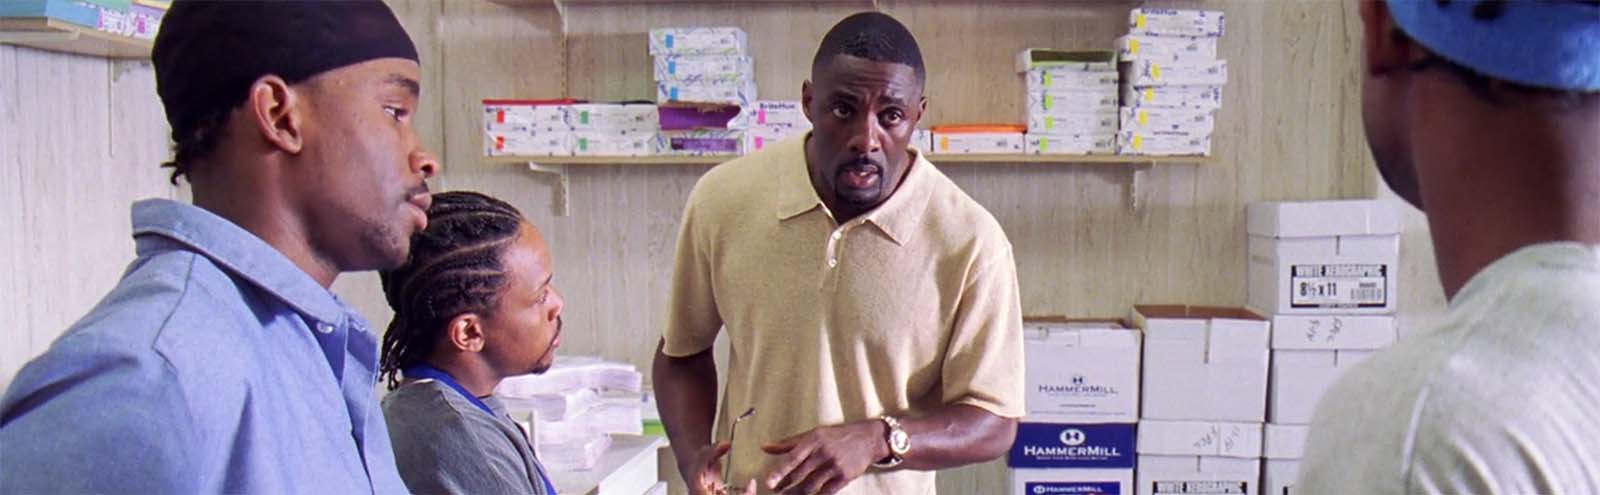 Idris Elba as Stringer Bell on The Wire